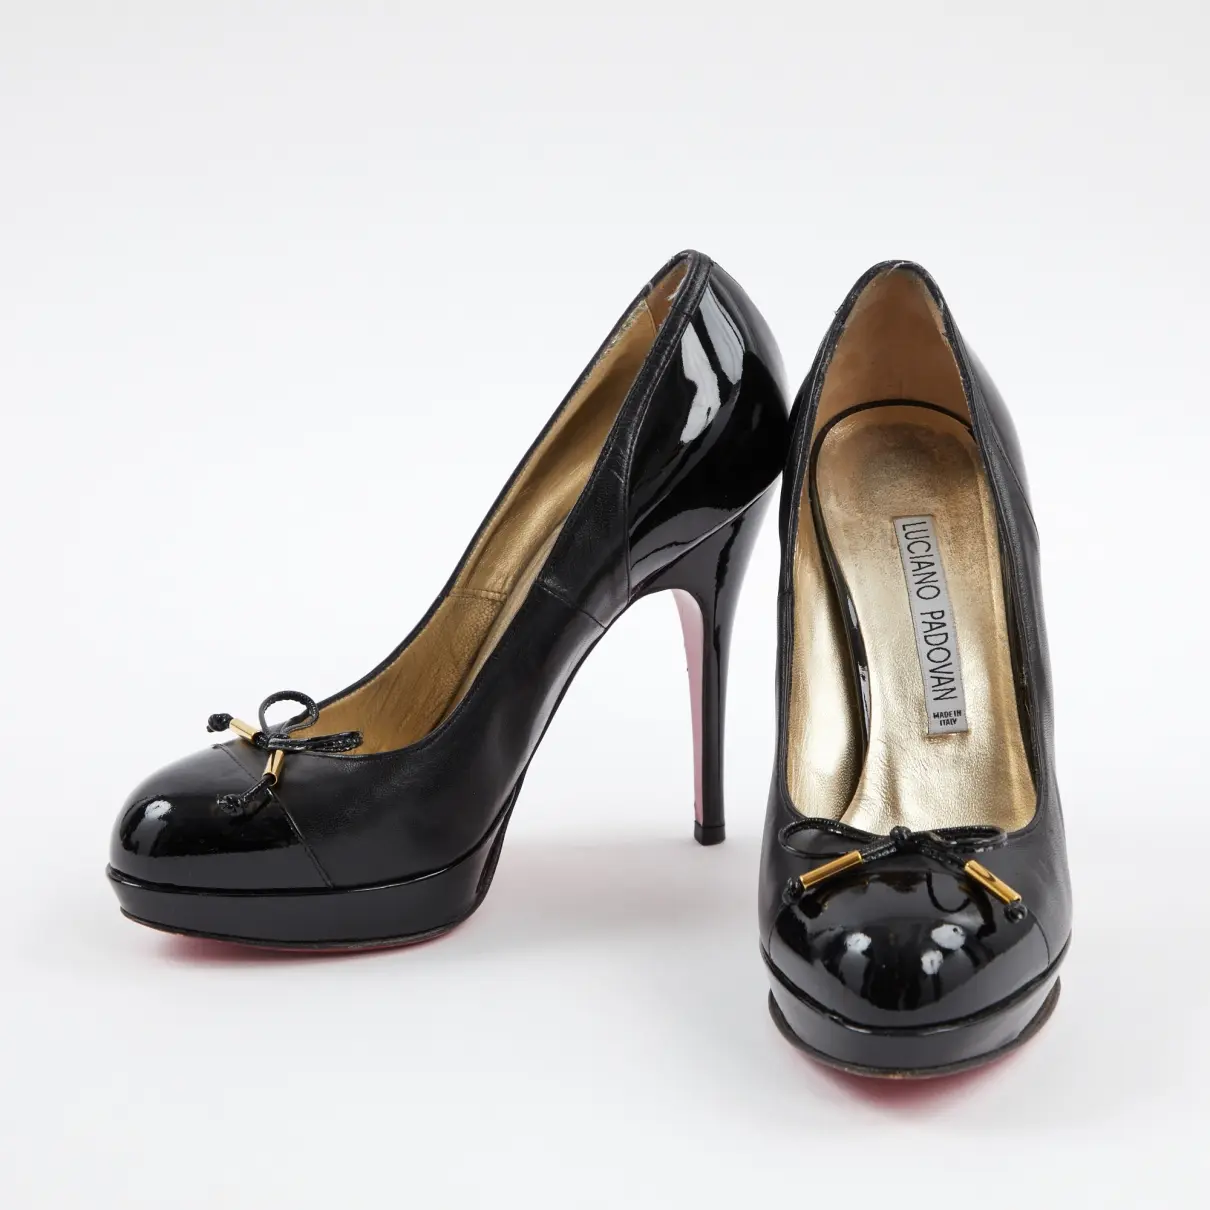 Luciano Padovan Patent leather heels for sale